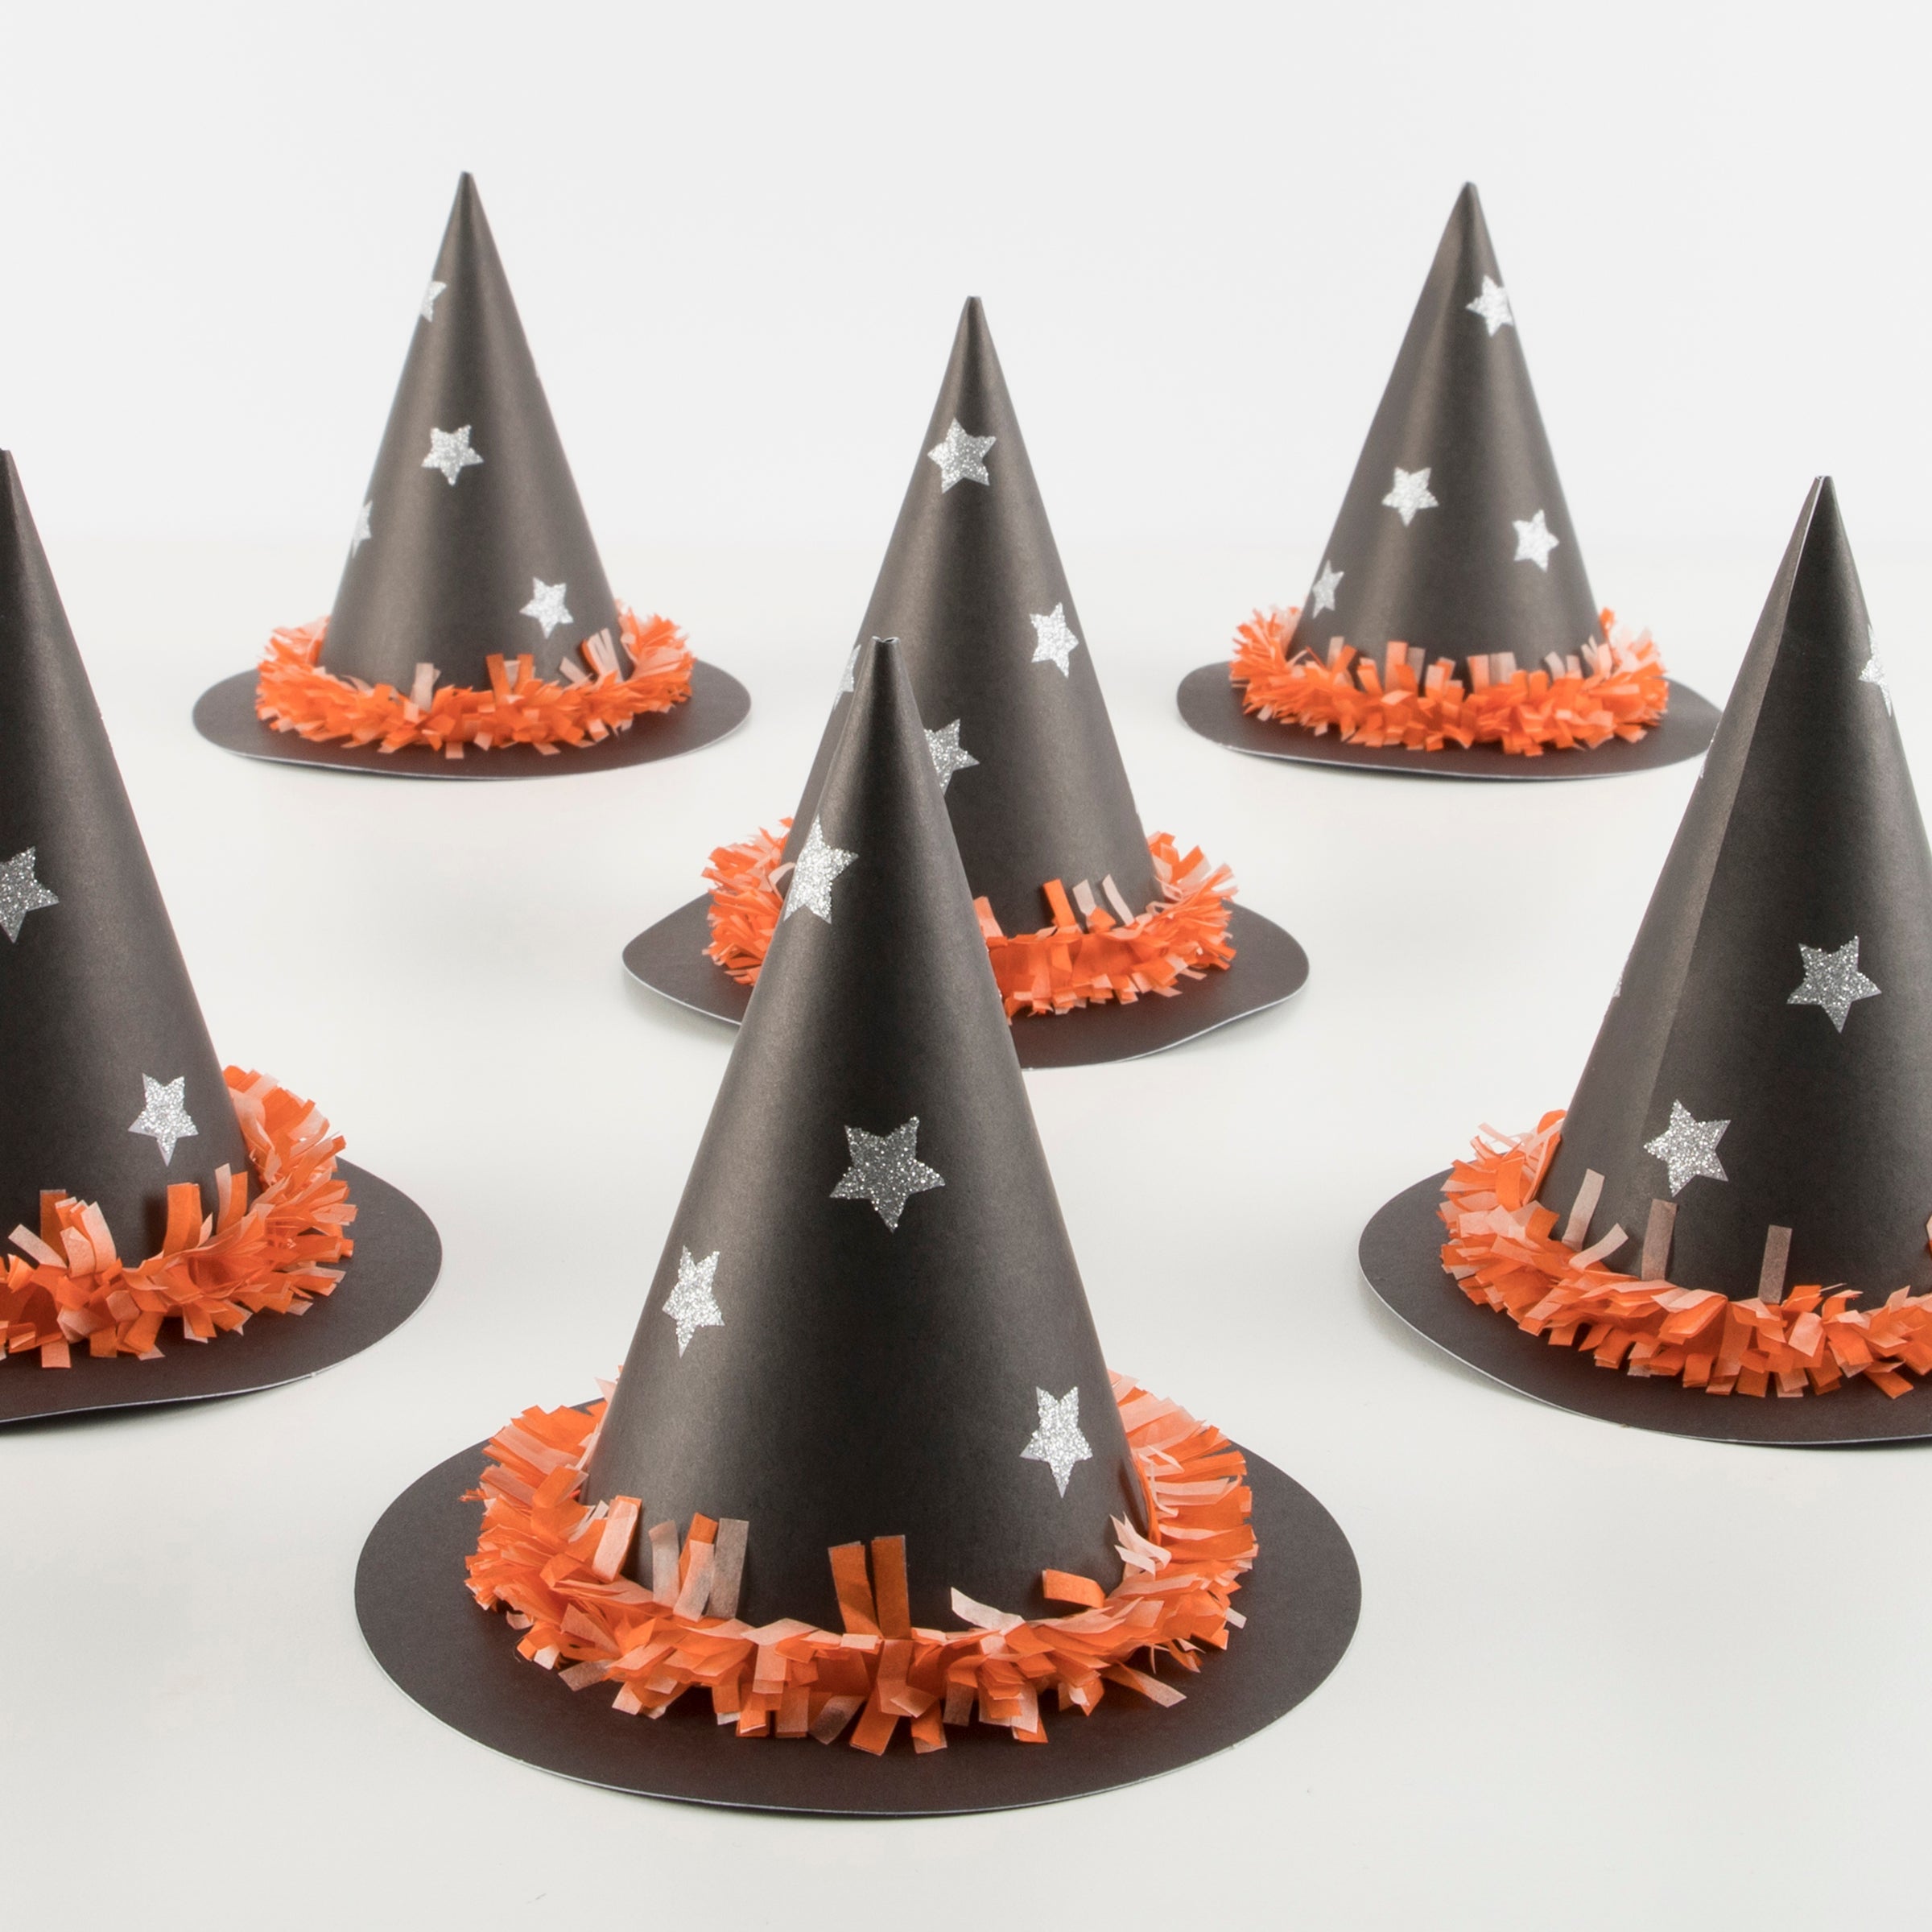 Festooning Witch Party Hats (6 Pack)